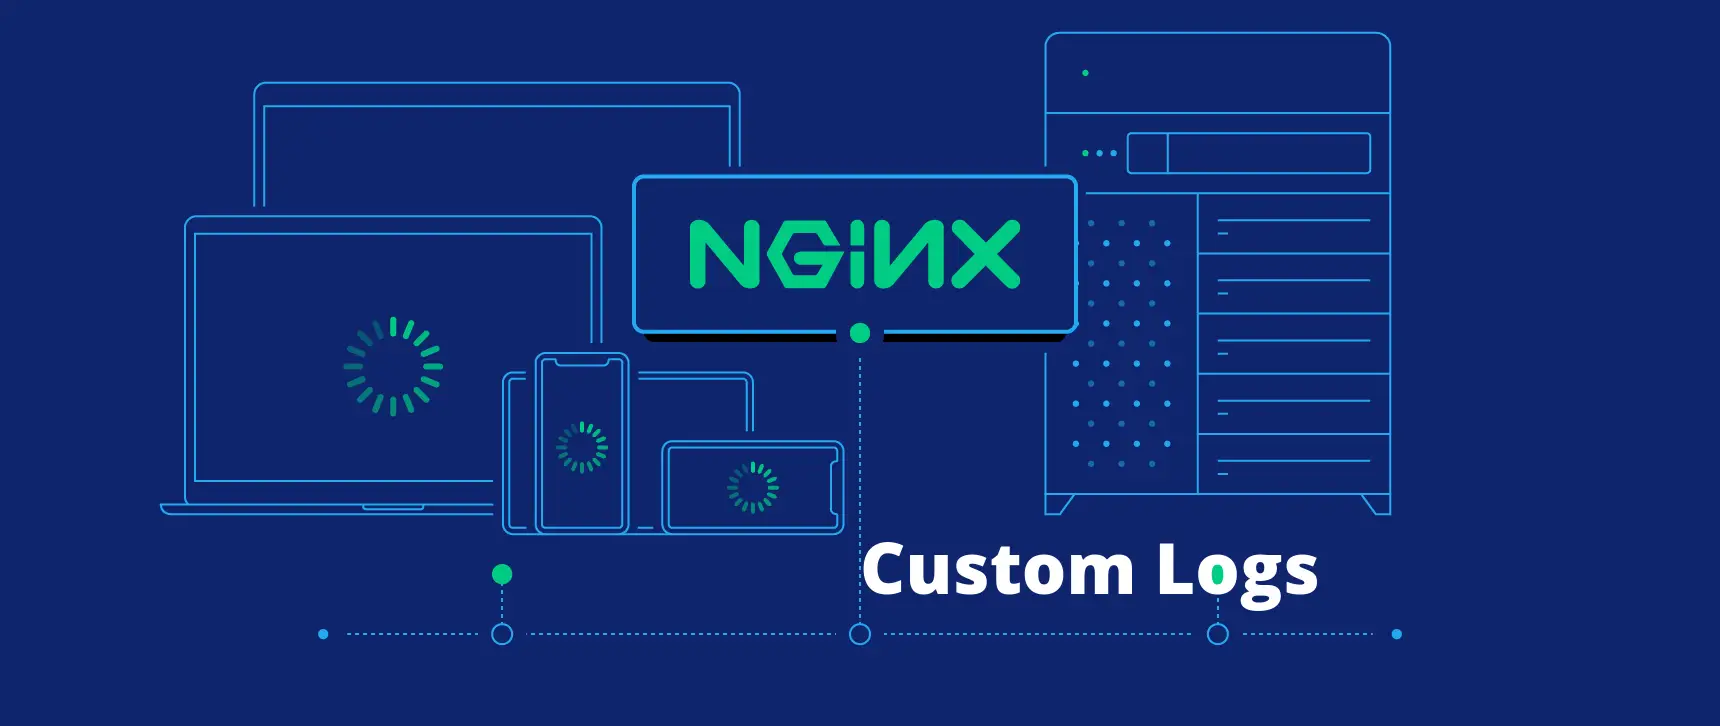 How to Configure nginx Custom Access and Error Log Formats